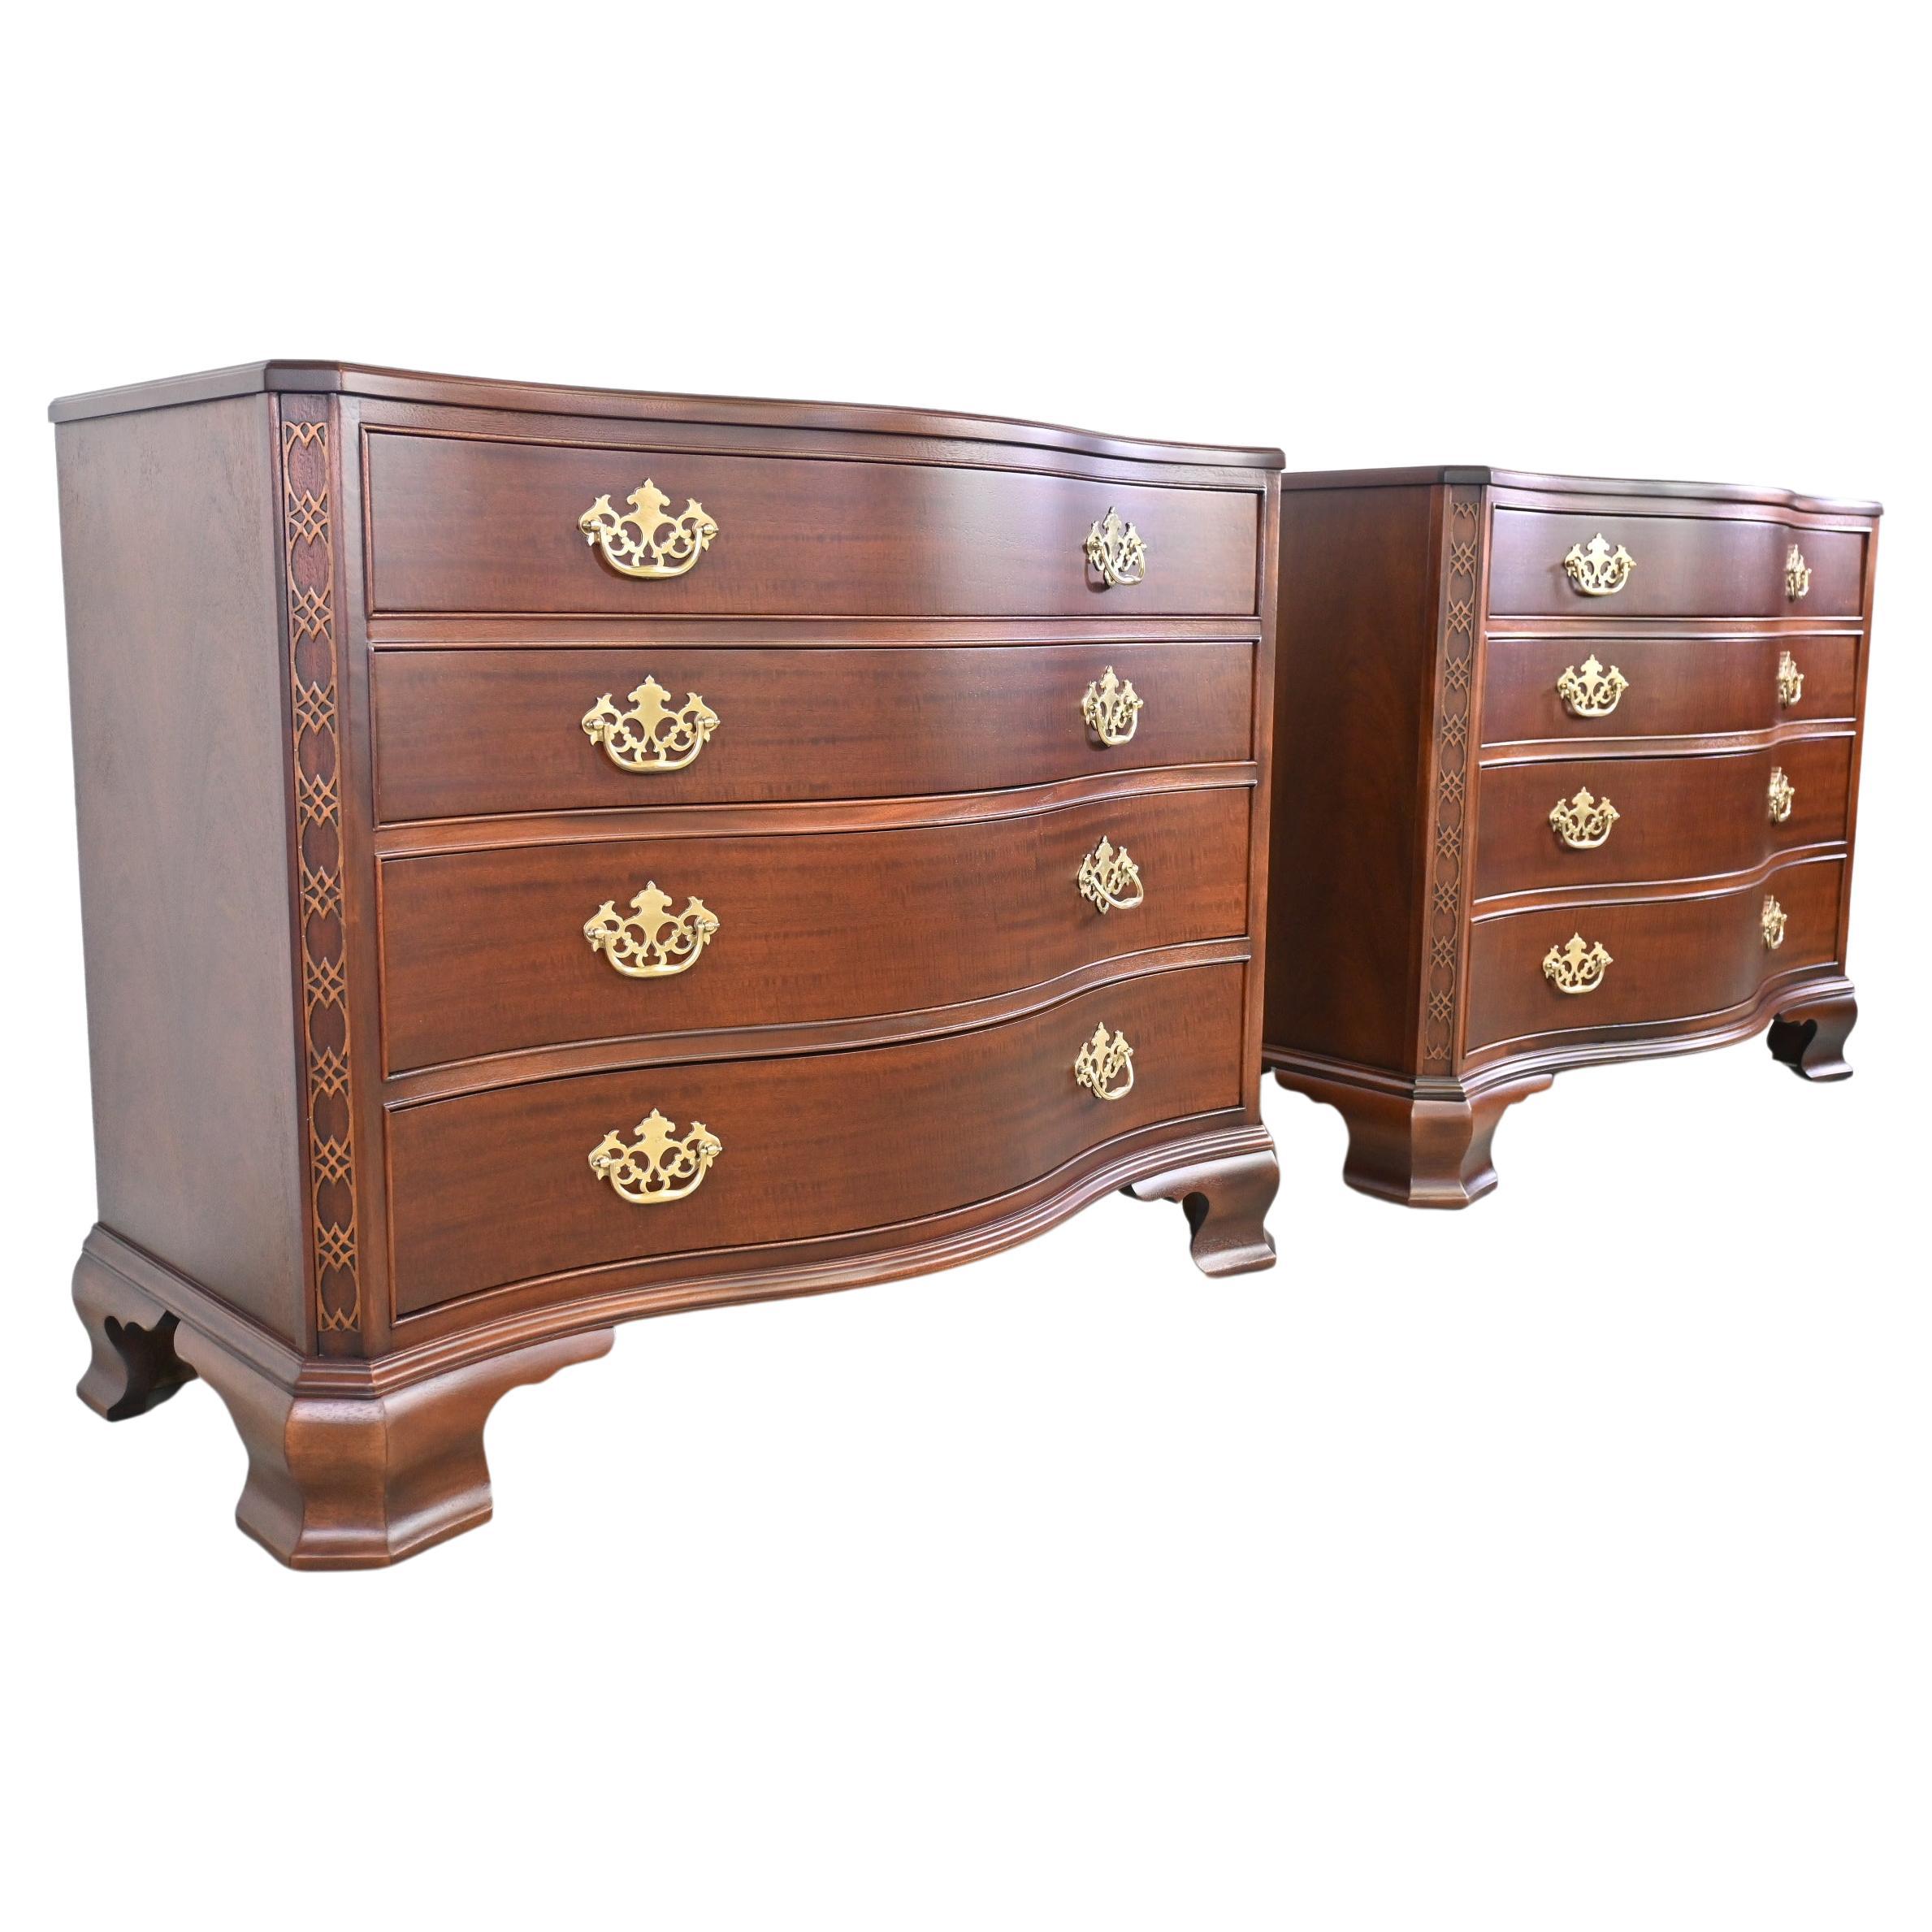 Baker Furniture Historic Charleston Chippendale style carved mahogany dresser chests, a pair

Baker Furniture, USA, 1980s

41.88 Wide x 20 Deep x 33.25 High

Chippendale style mahogany dressers or chests with carved details, four drawers, and